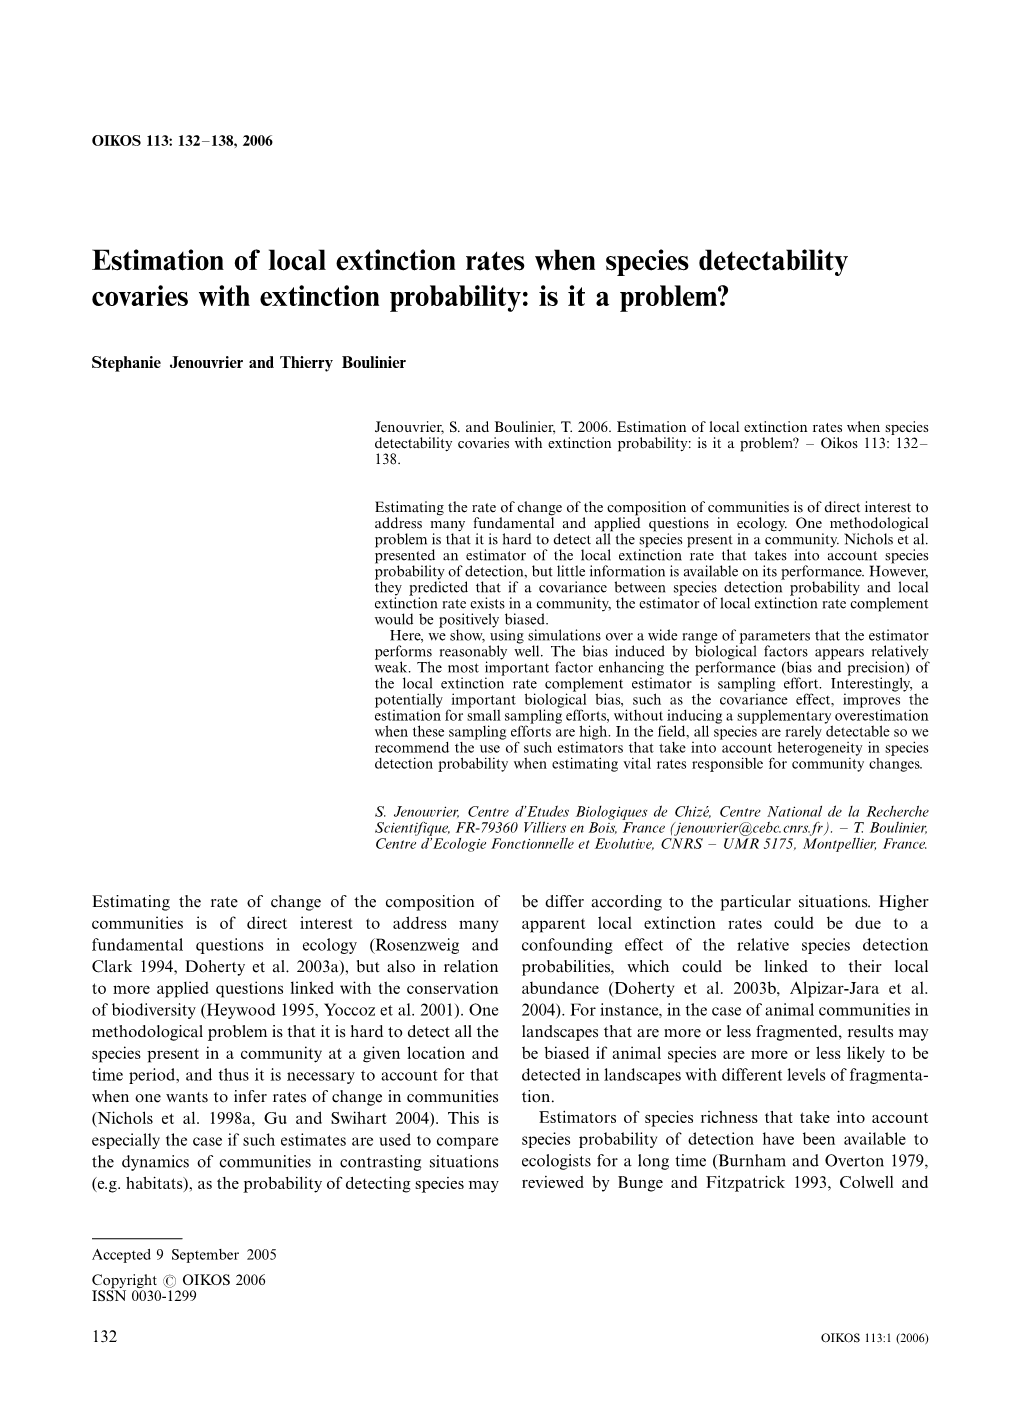 Estimation of Local Extinction Rates When Species Detectability Covaries with Extinction Probability: Is It a Problem?